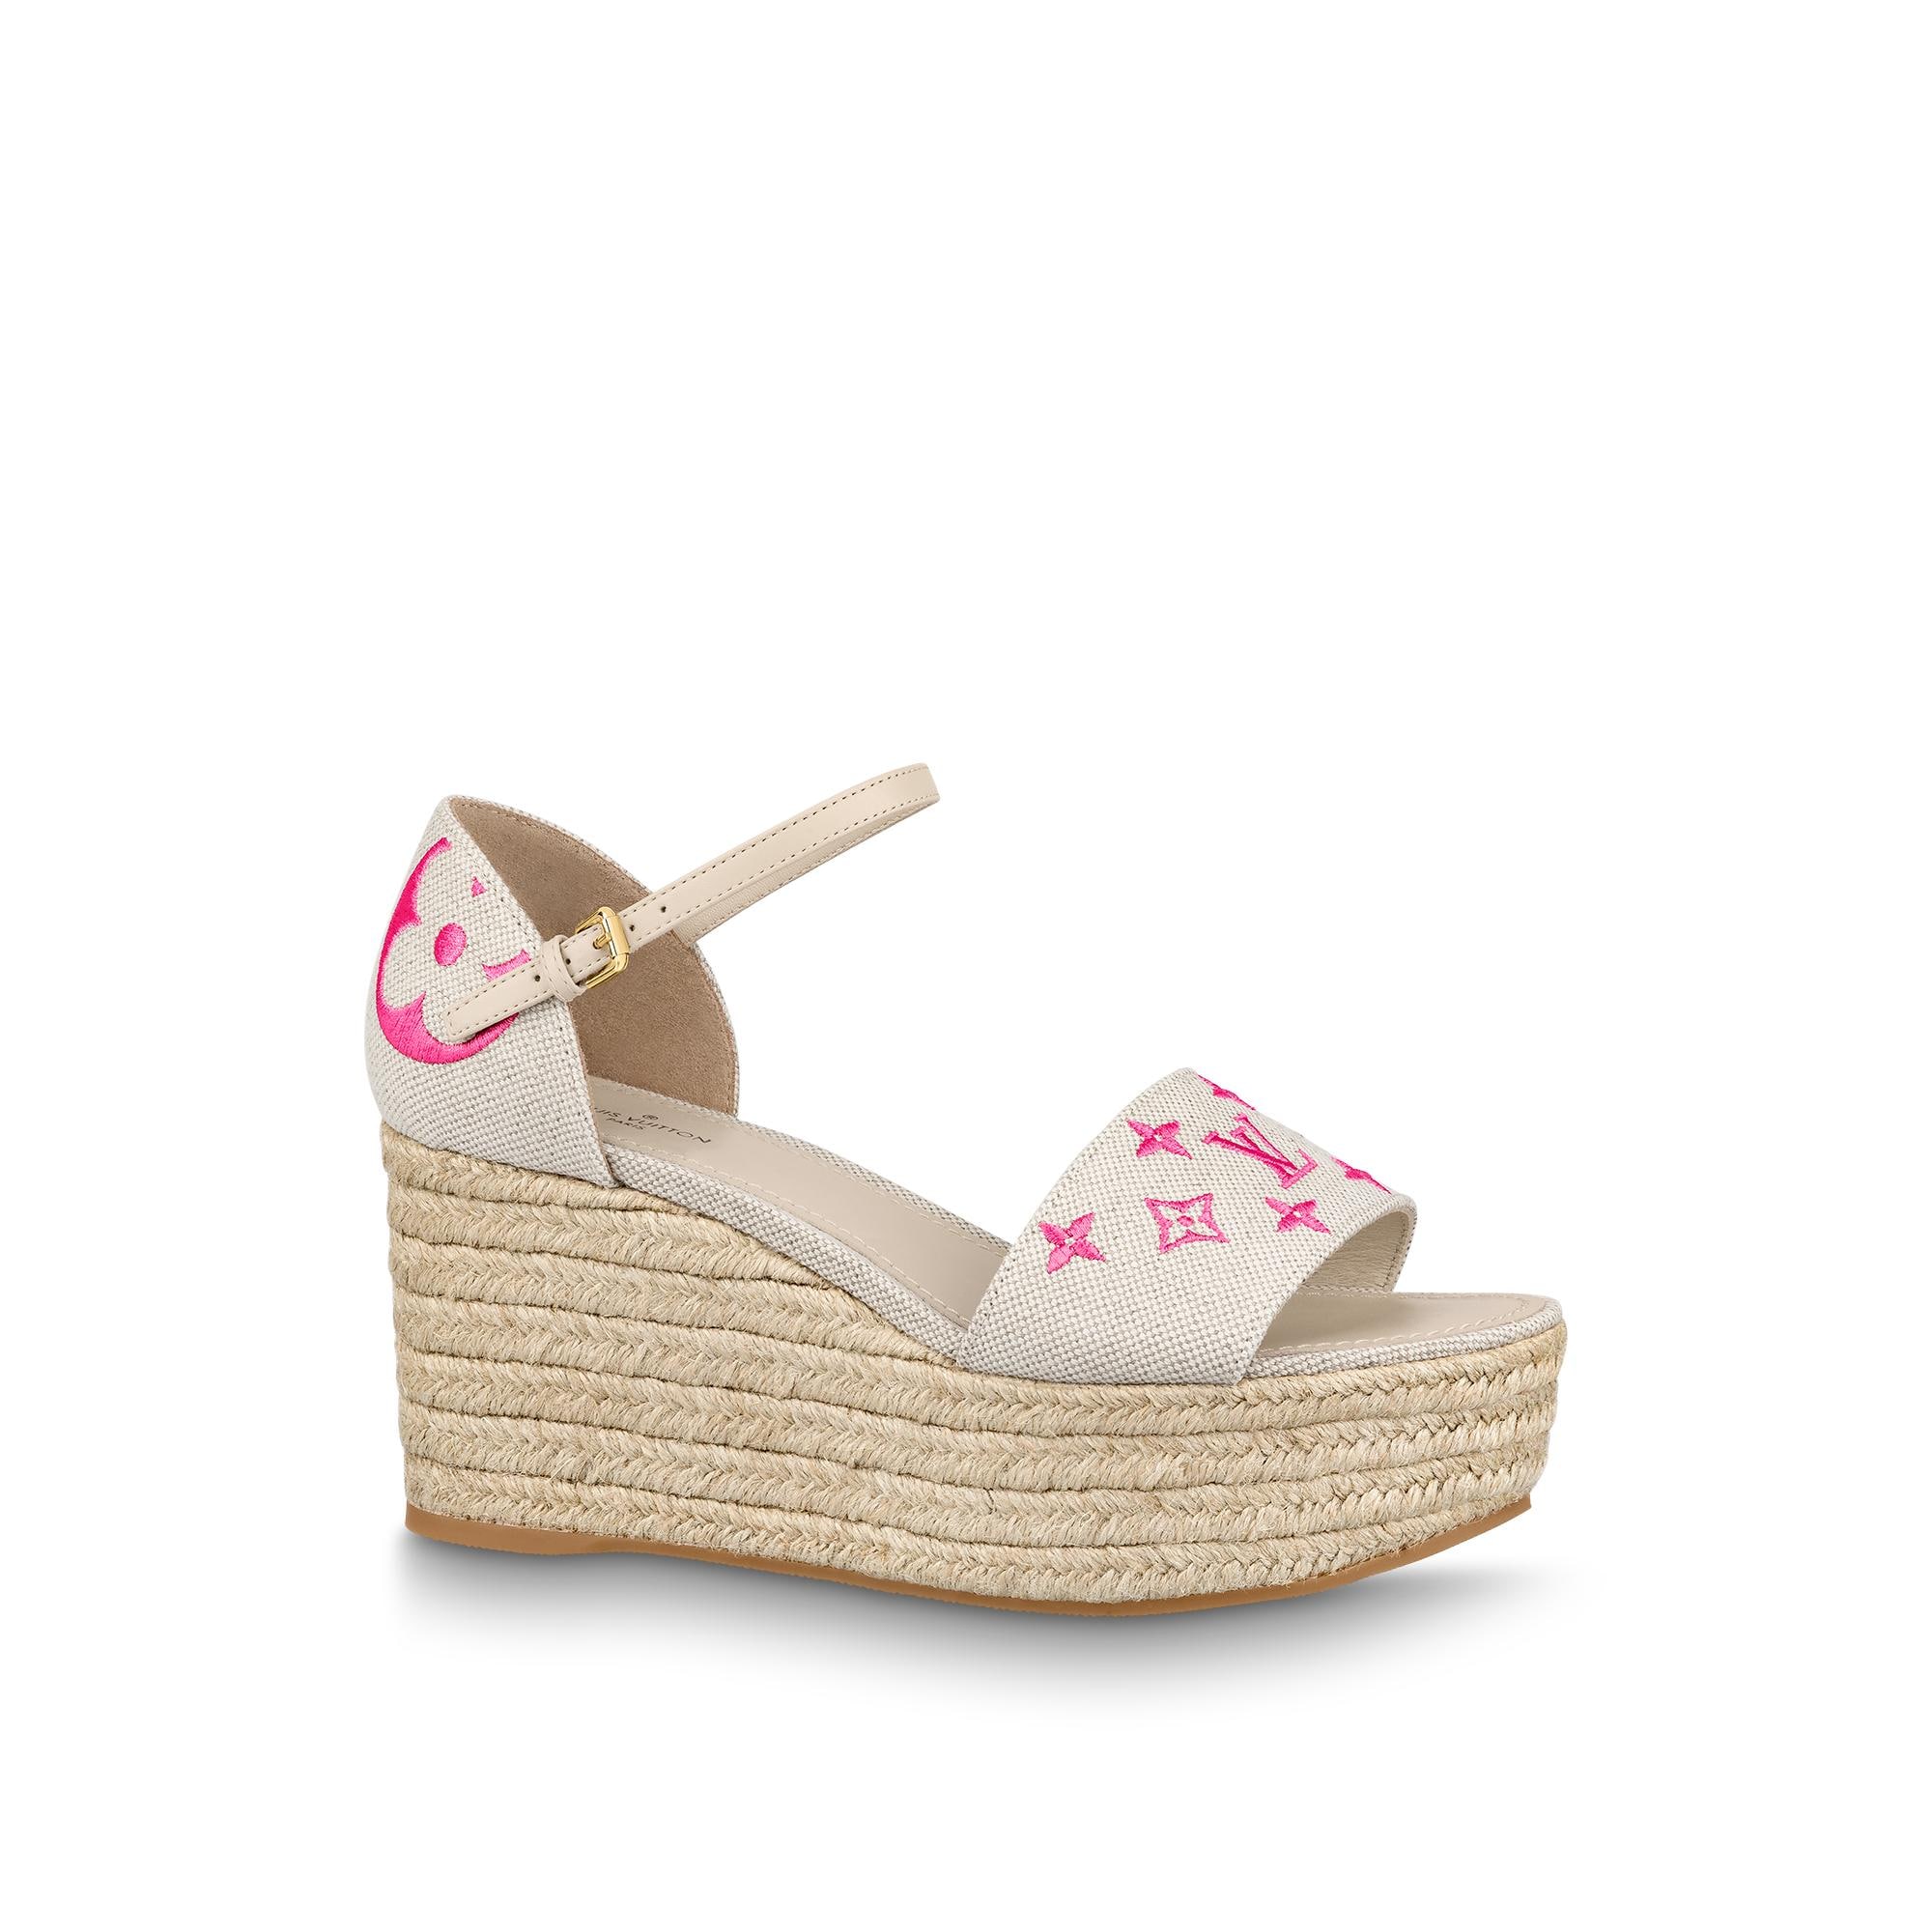 SS-22 Louis Vuitton Starboard Wedge Sandal